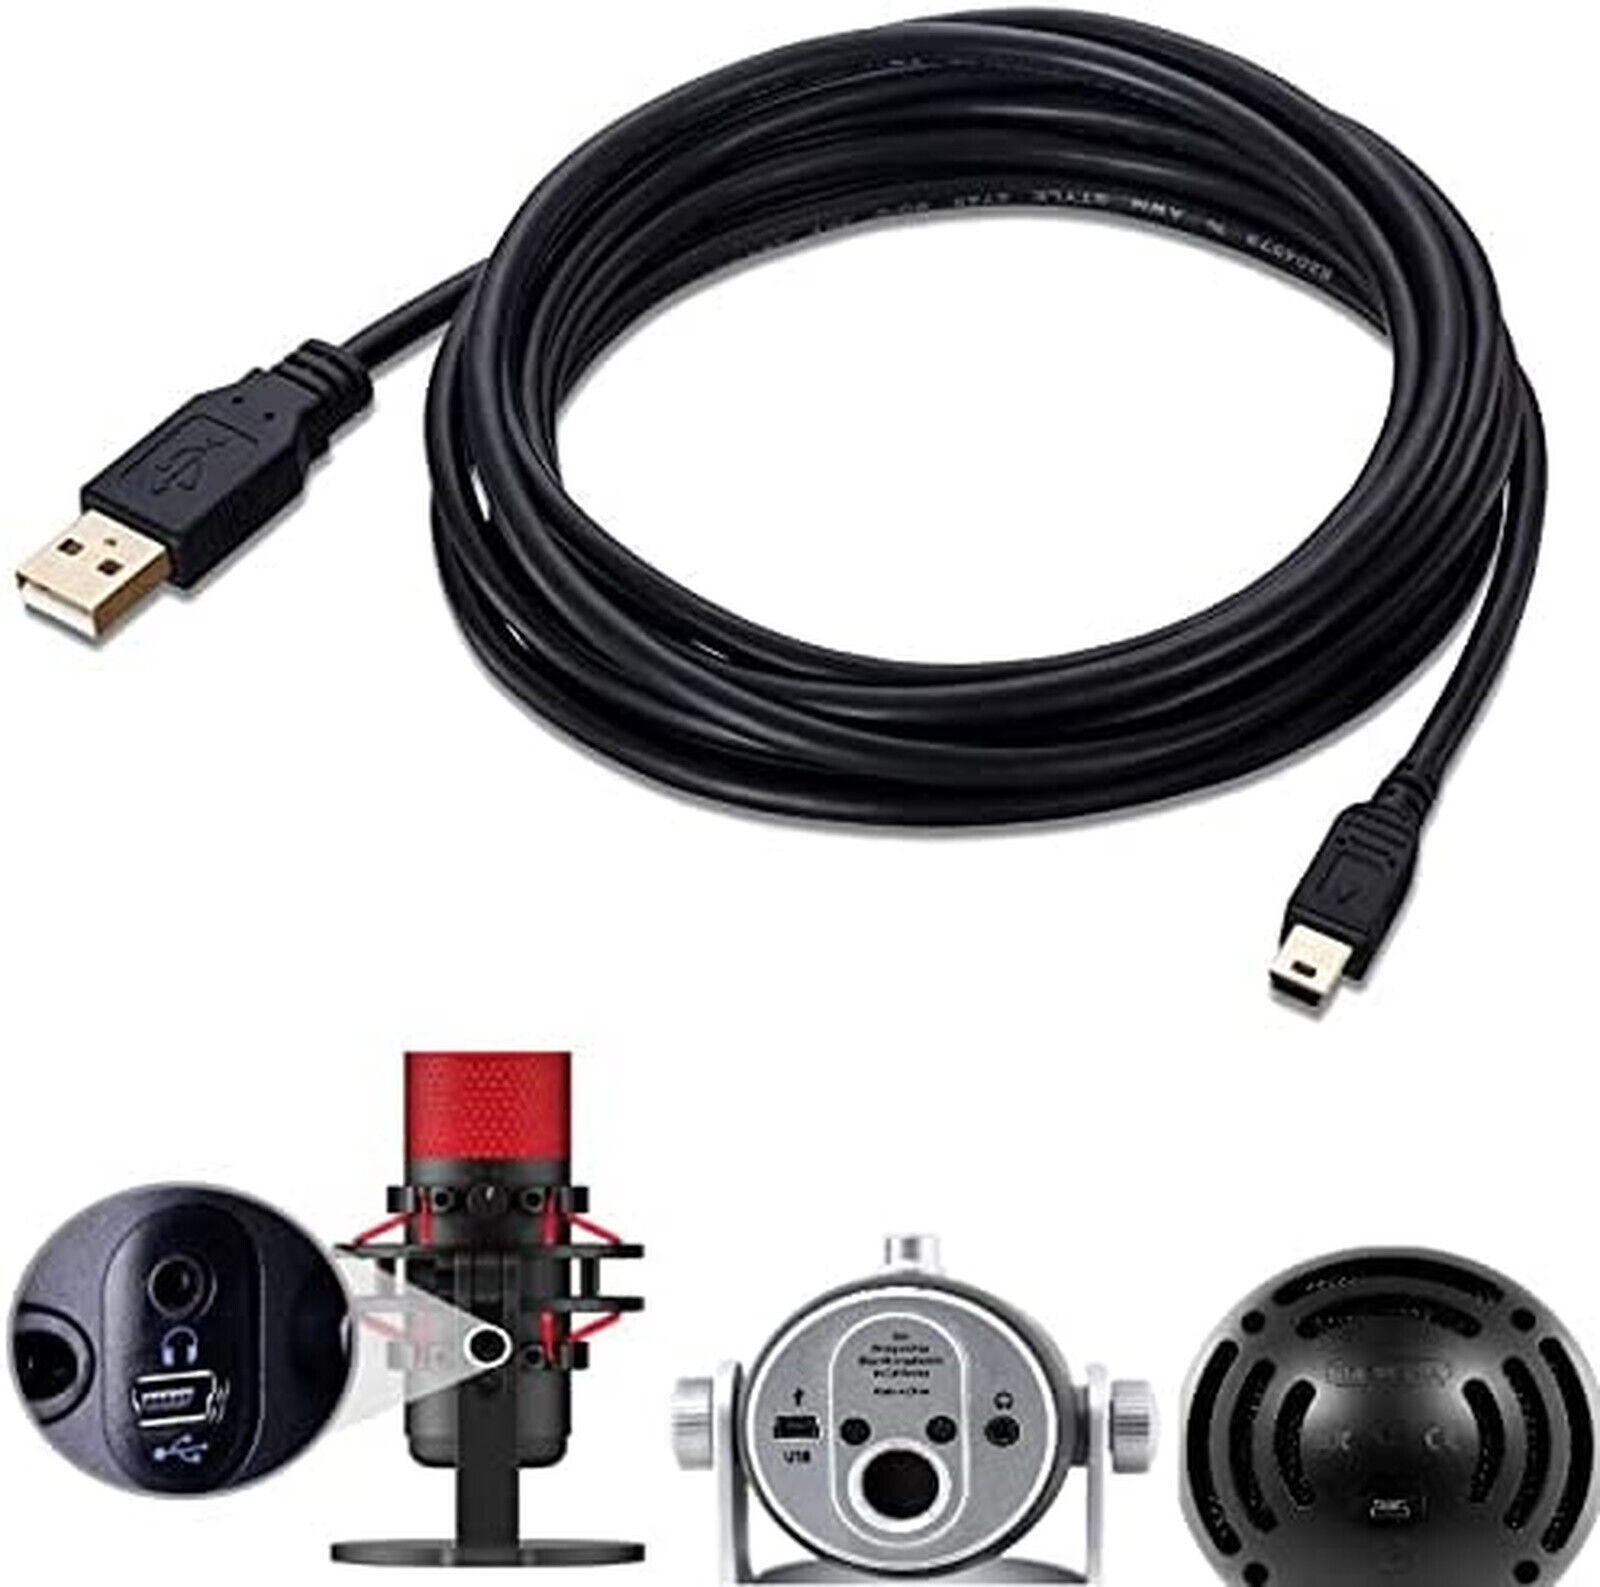 10FT USB Cable Cord for Blue Snowball iCE / Black Out / HyperX Quadcast